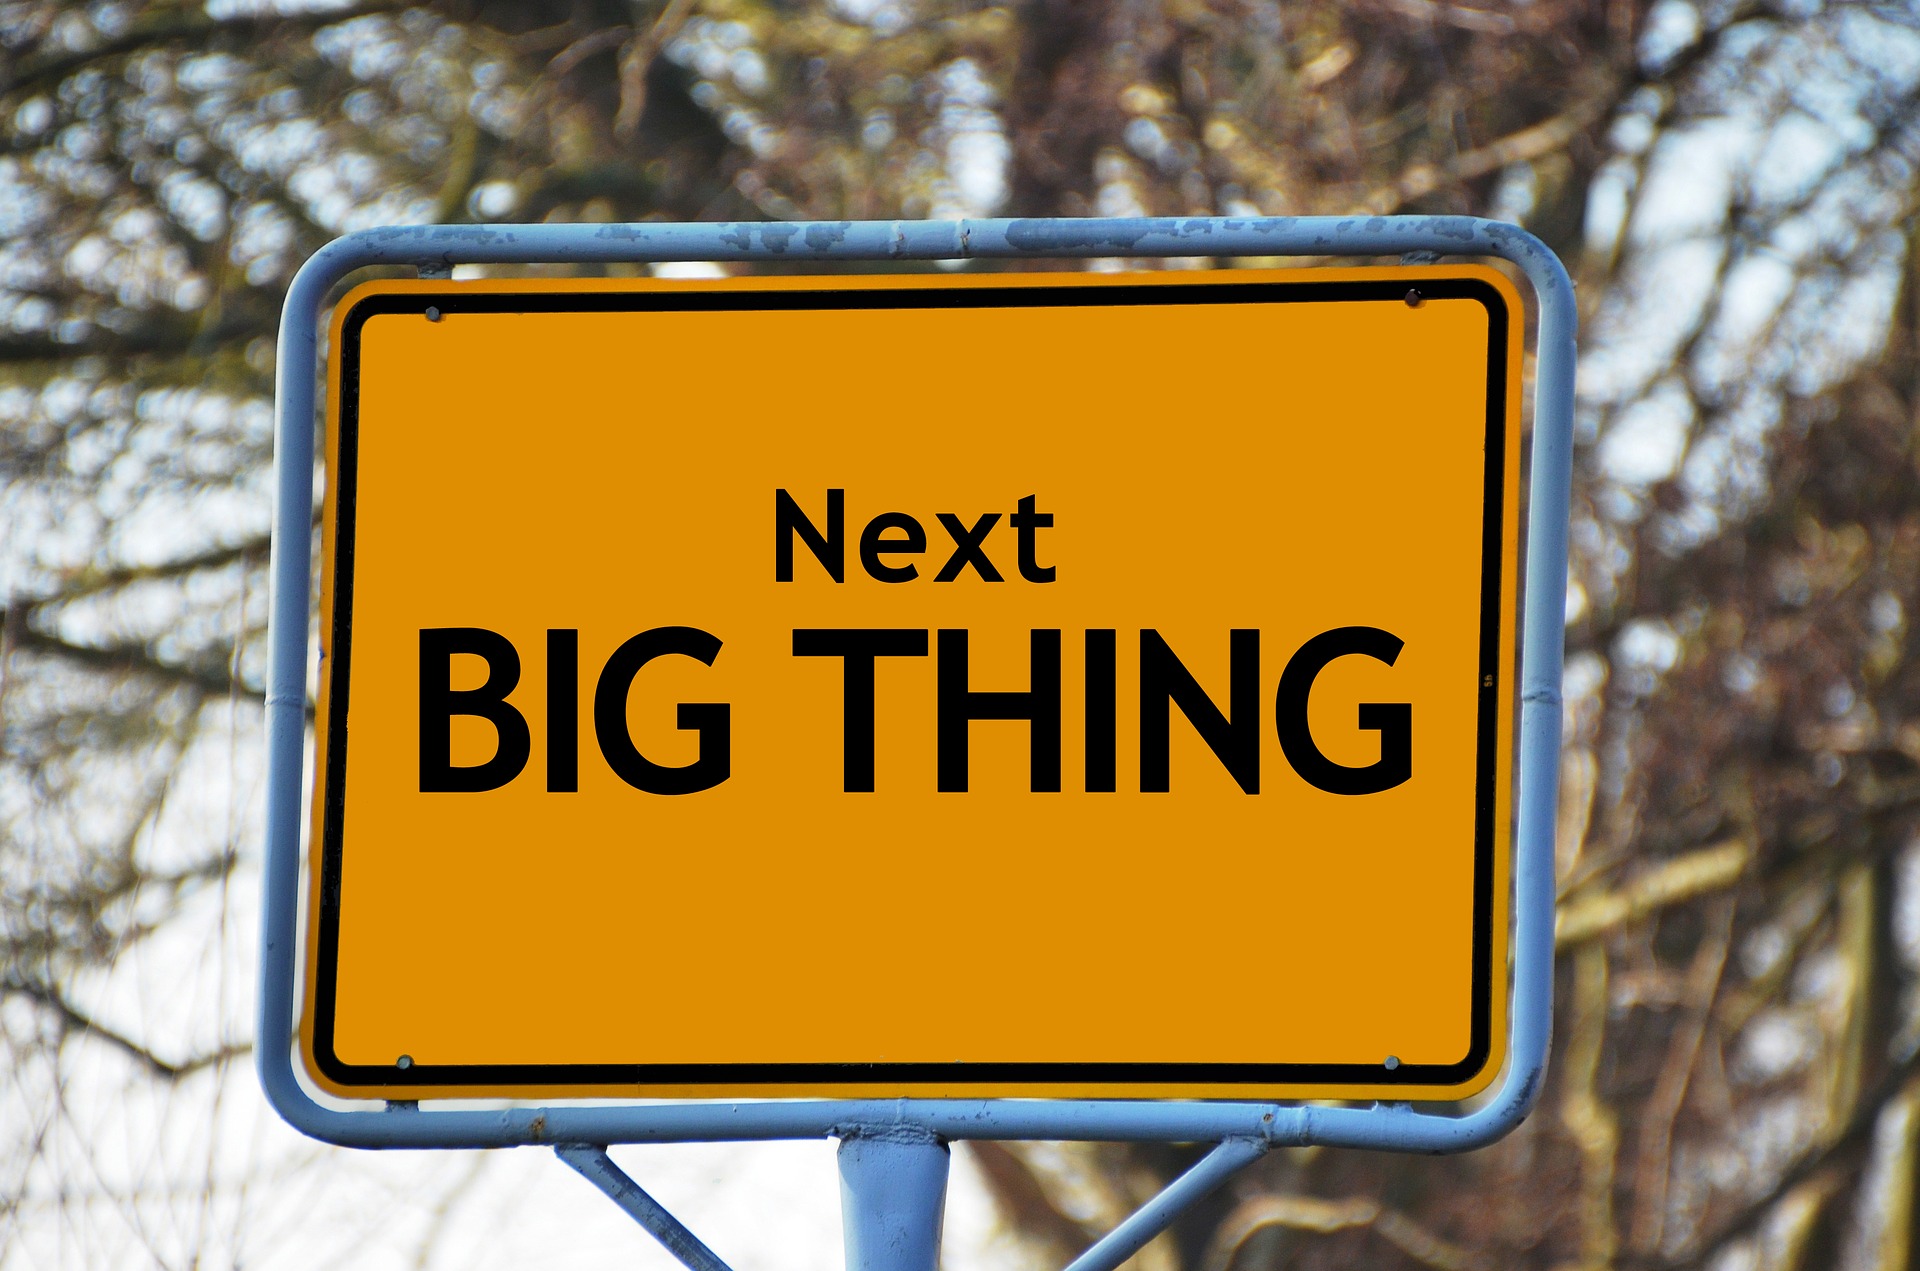 The next big thing requires action